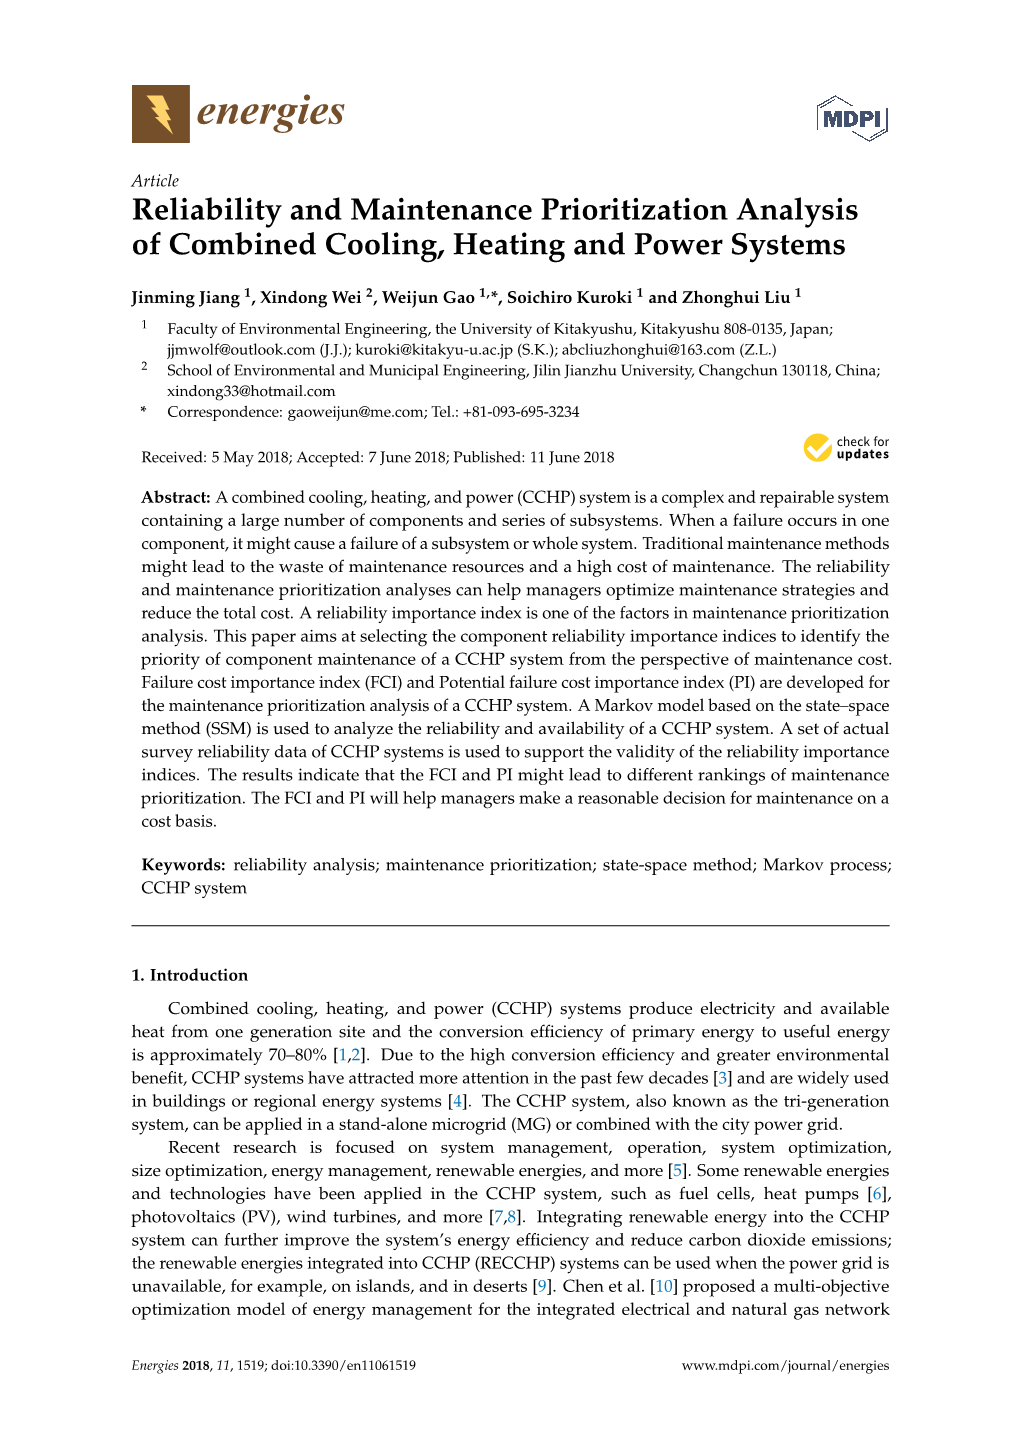 Reliability and Maintenance Prioritization Analysis of Combined Cooling, Heating and Power Systems